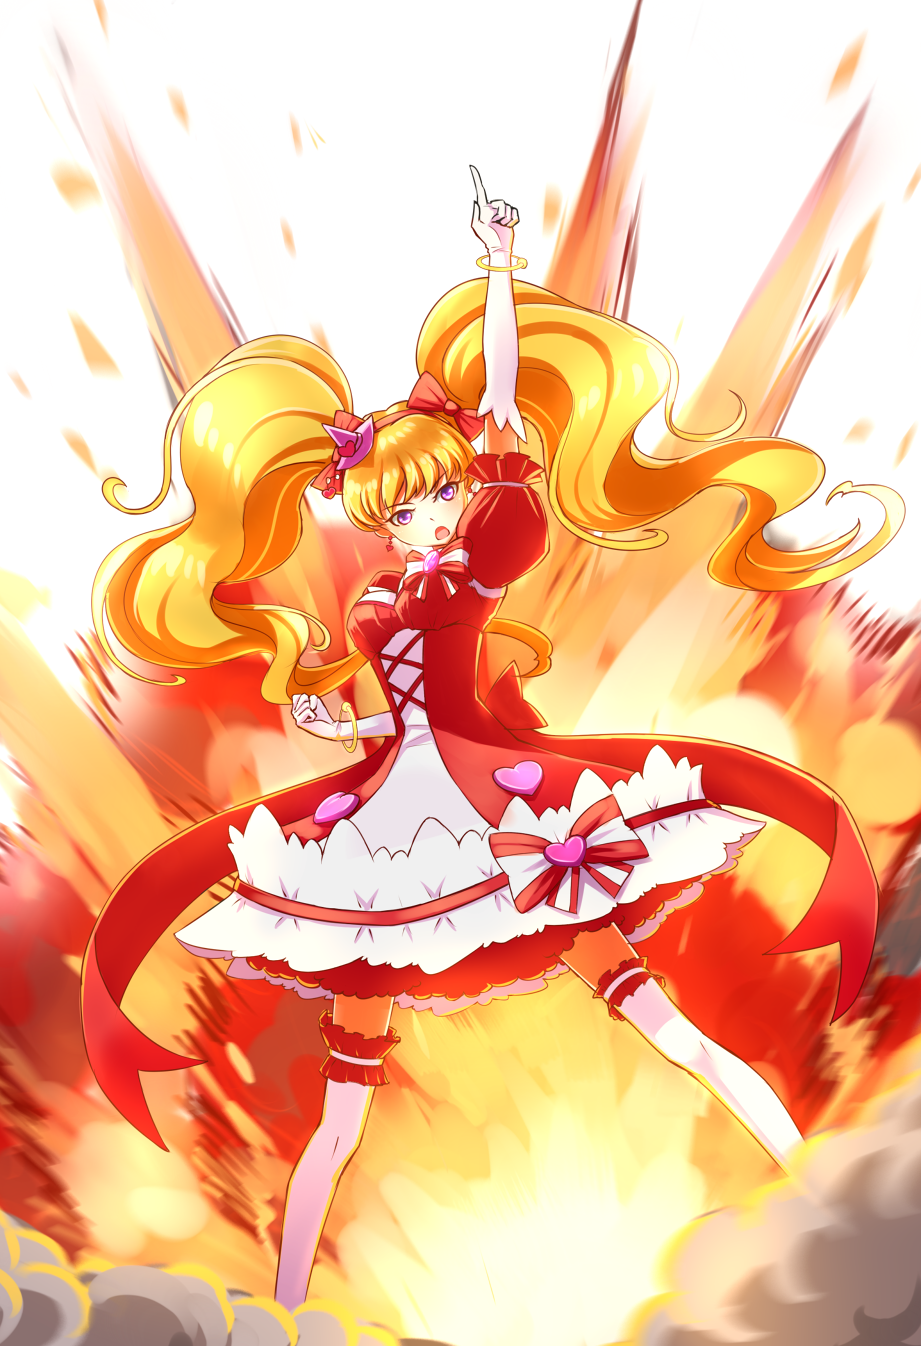 1girl :o arm_up asahina_mirai blonde_hair bow cure_miracle duke778 elbow_gloves explosion full_body gloves hair_bow hat highres long_hair magical_girl mahou_girls_precure! mini_hat mini_witch_hat pink_hat pointing precure red_bow ruby_style serious skirt solo striped striped_bow thigh-highs twintails violet_eyes white_background white_gloves white_legwear witch_hat